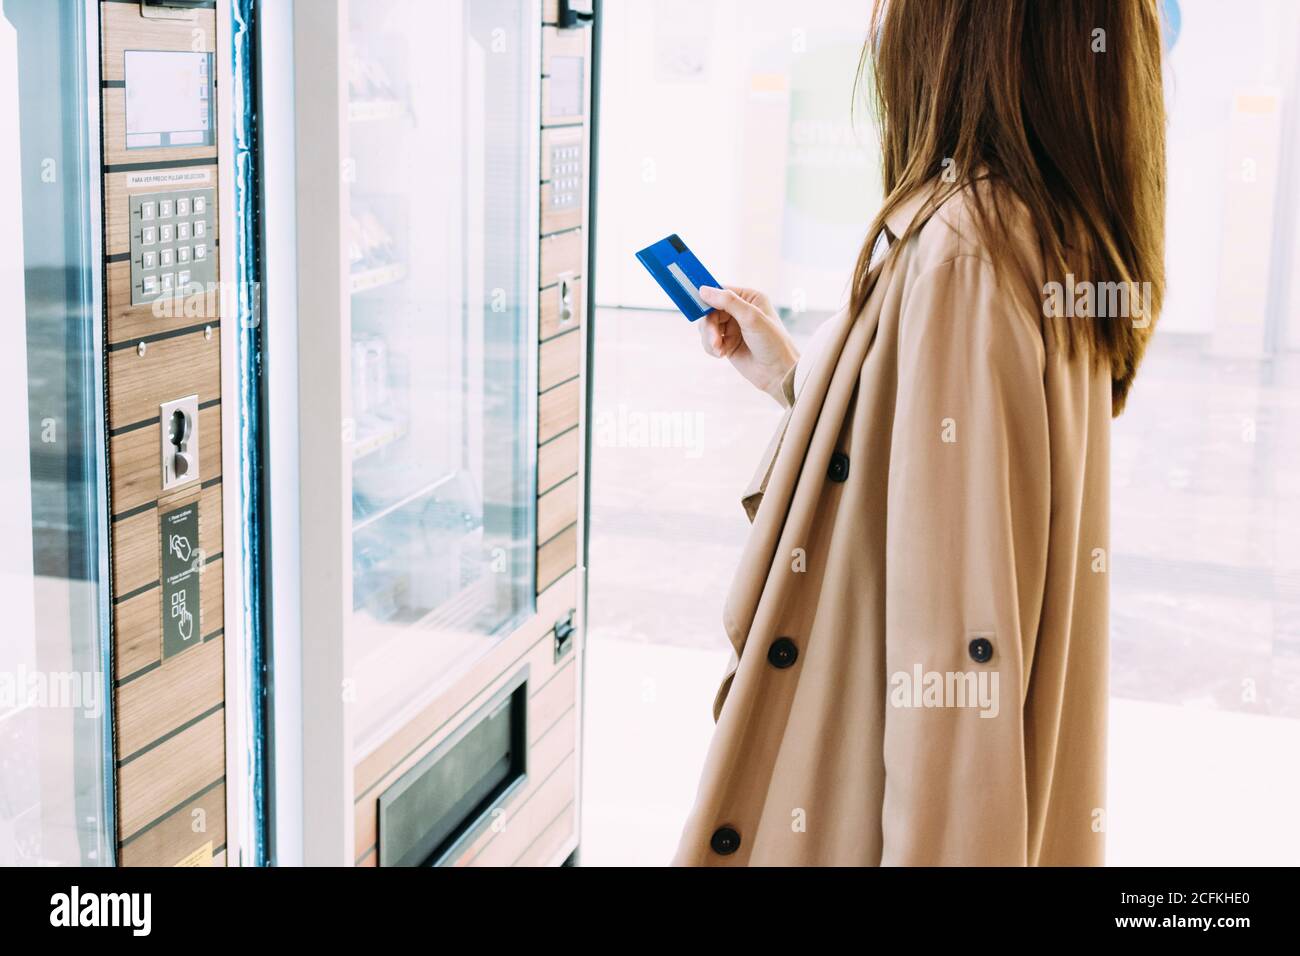 woman uses her credit card to pay at the vending machine Stock Photo